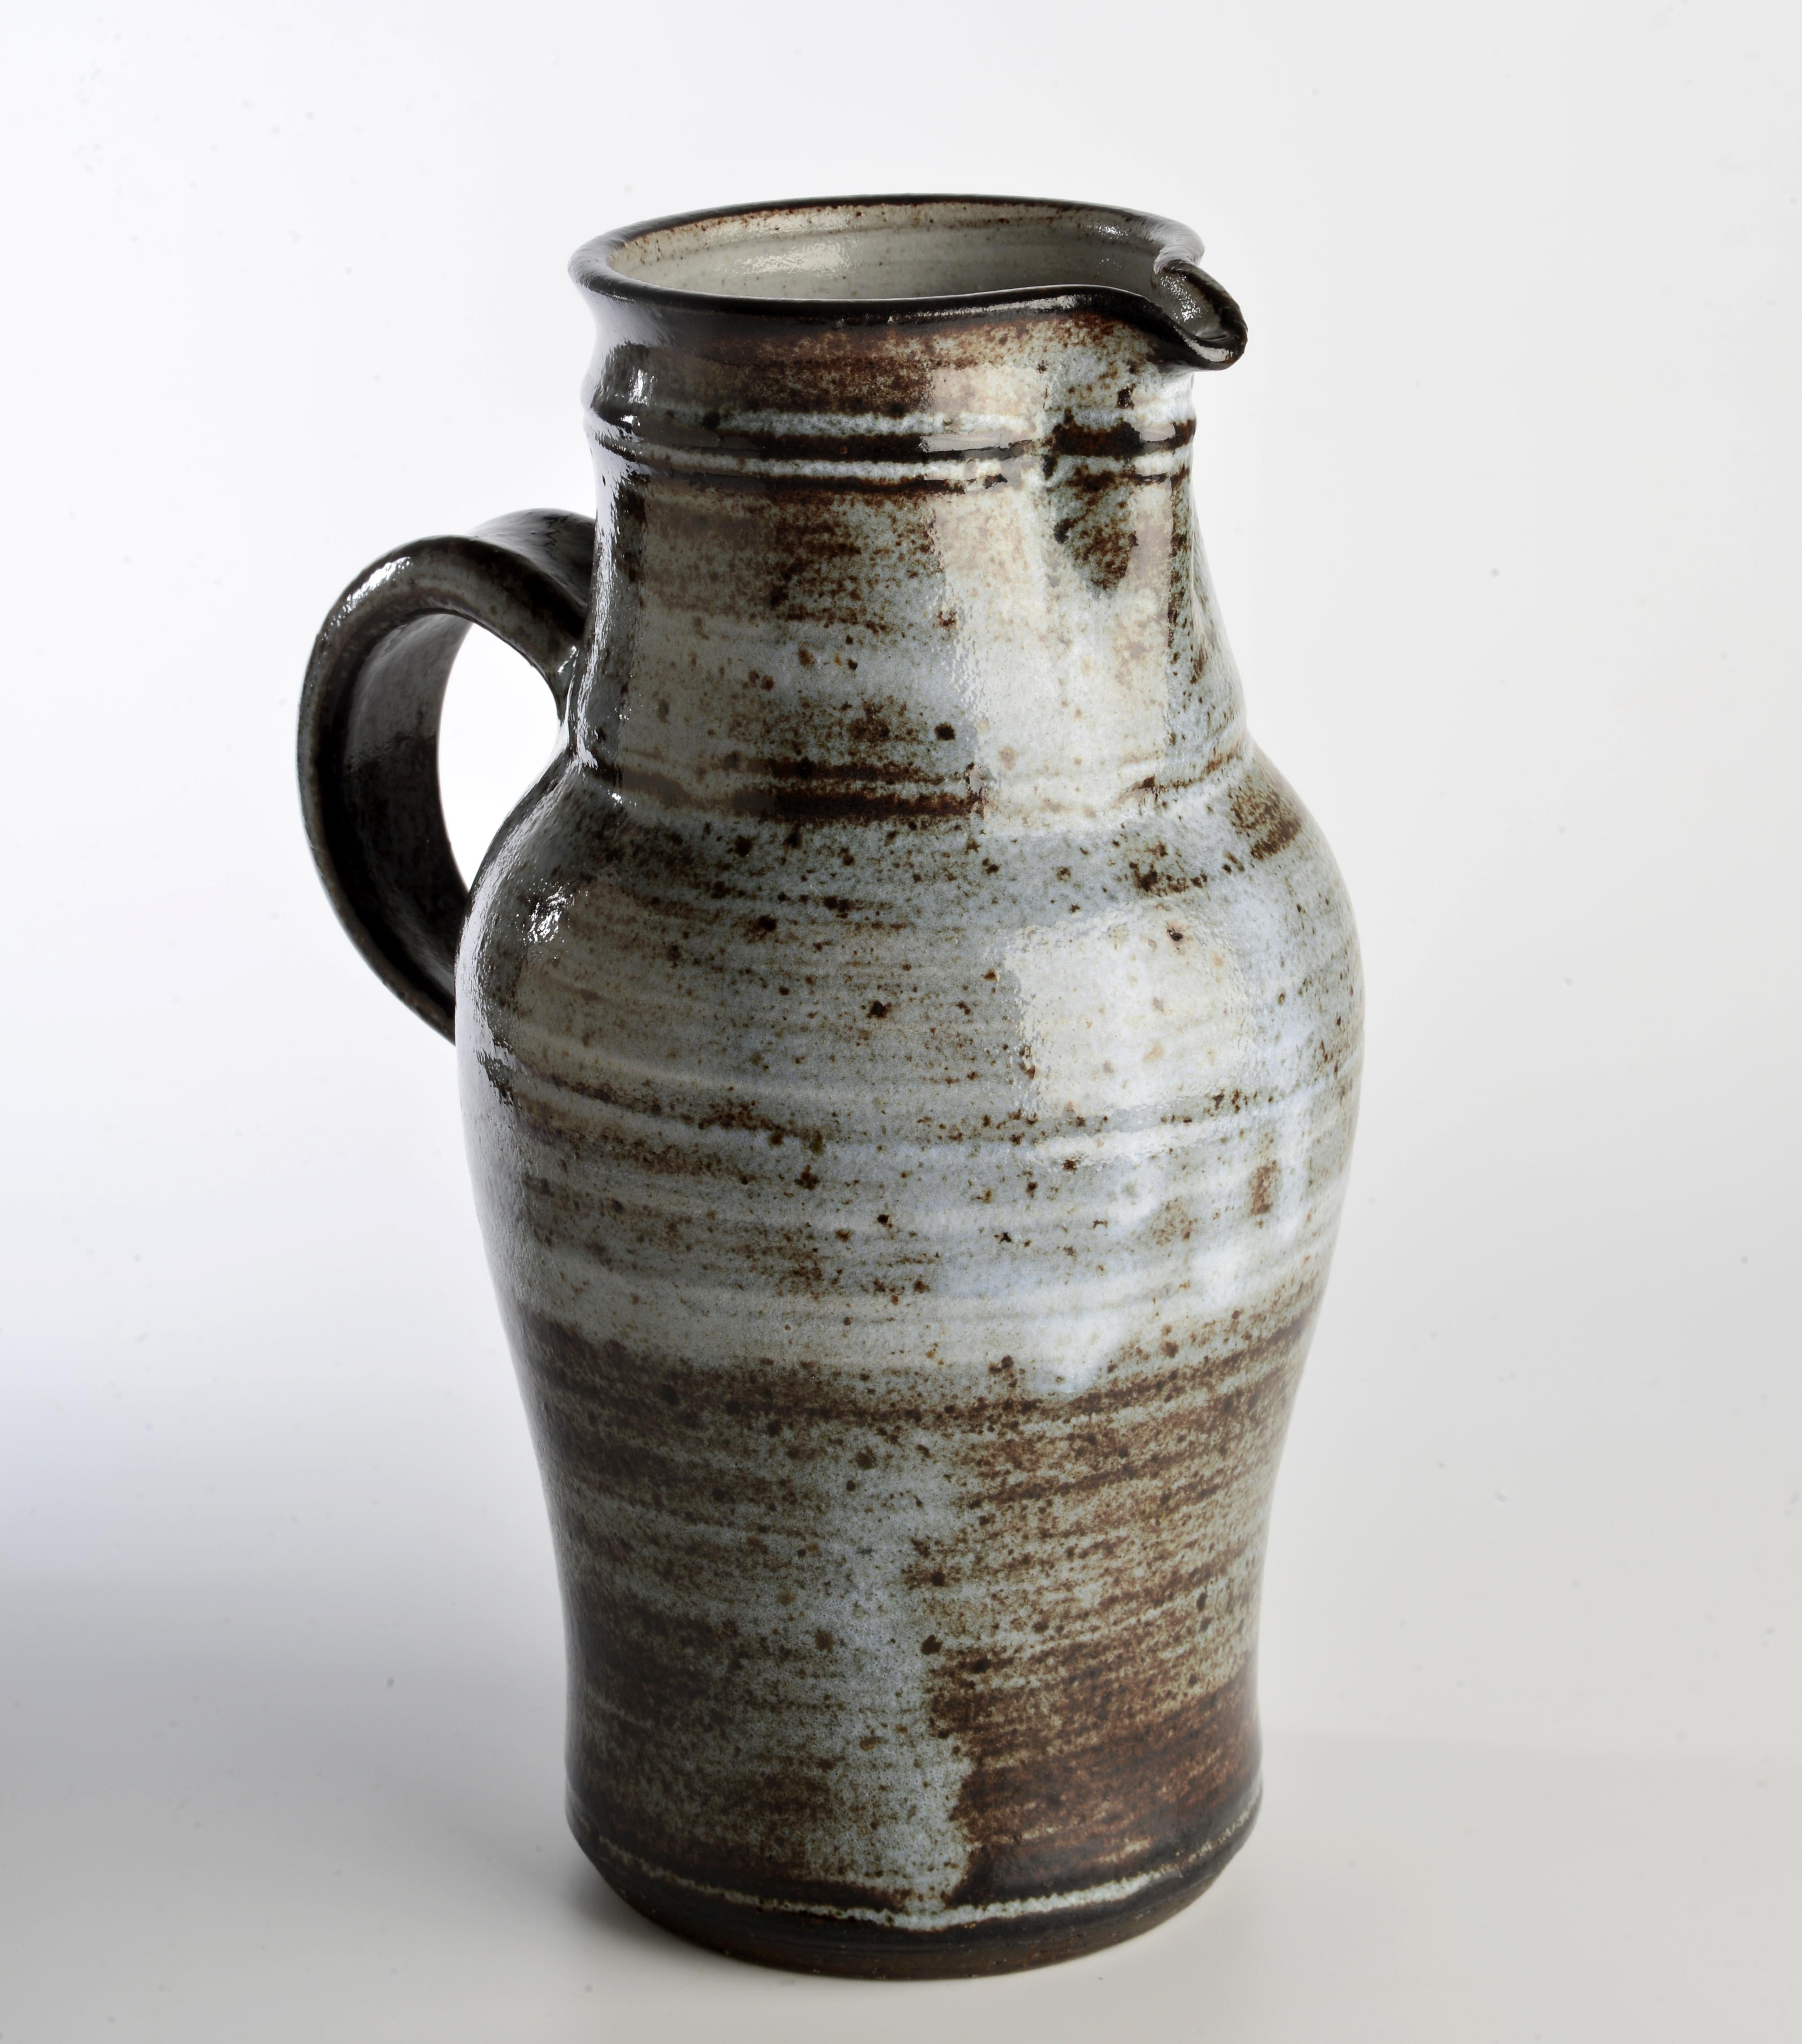 Stoneware pitcher made by Roger Collet in Vallauris (famous town for ceramic in the south of France) in the 60s and 70s. Roger Collet (1933-2008) was born in Switzerland and graduated from the ceramics school of Chavannes Rennens in 1952. He moved